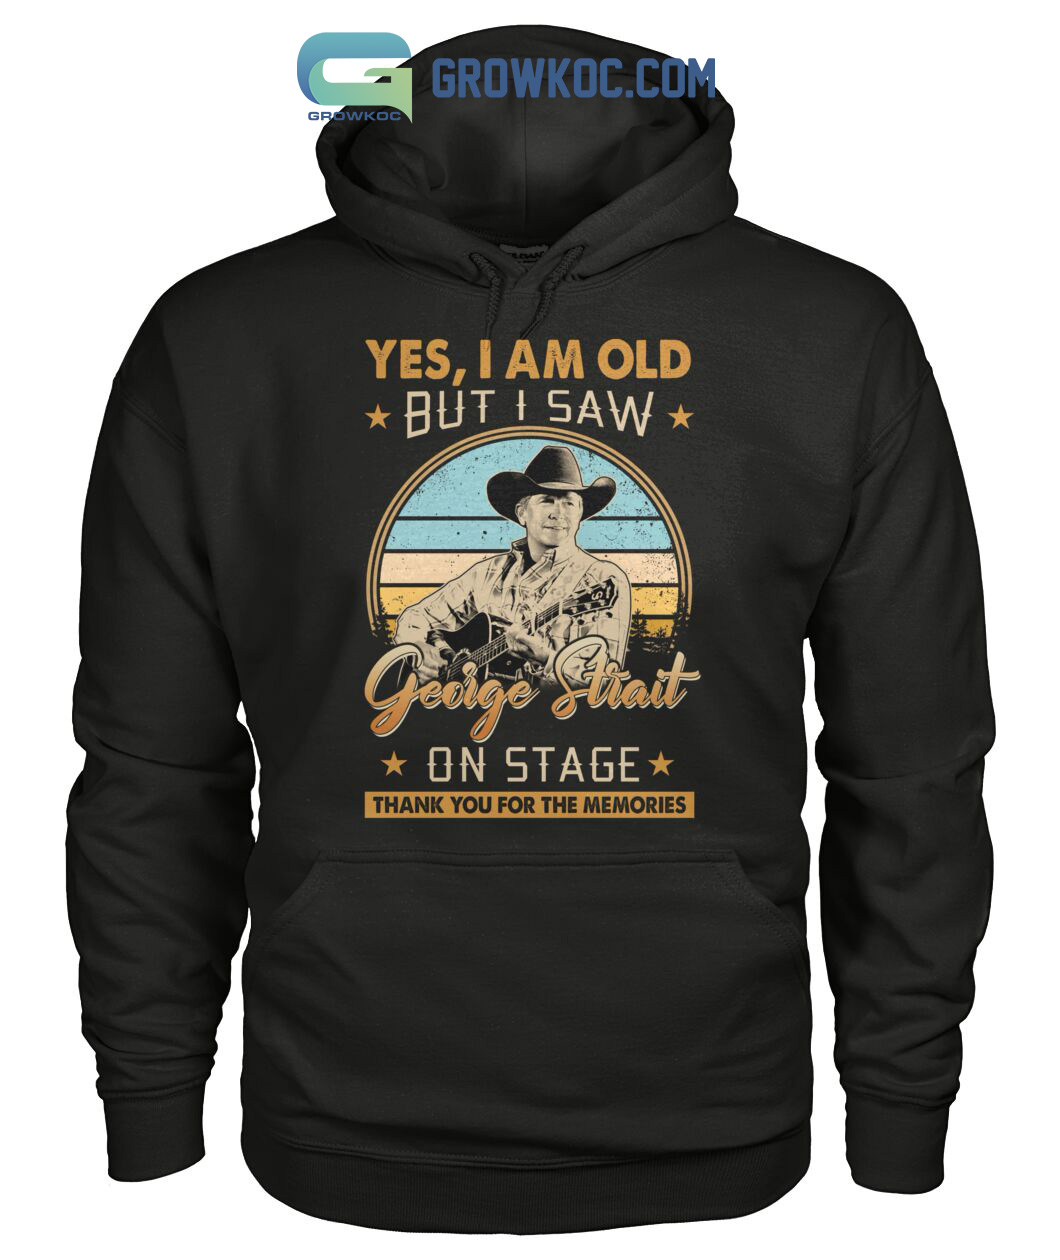 Yes I Am Old But I Saw George Strait On Stage Memories T Shirt